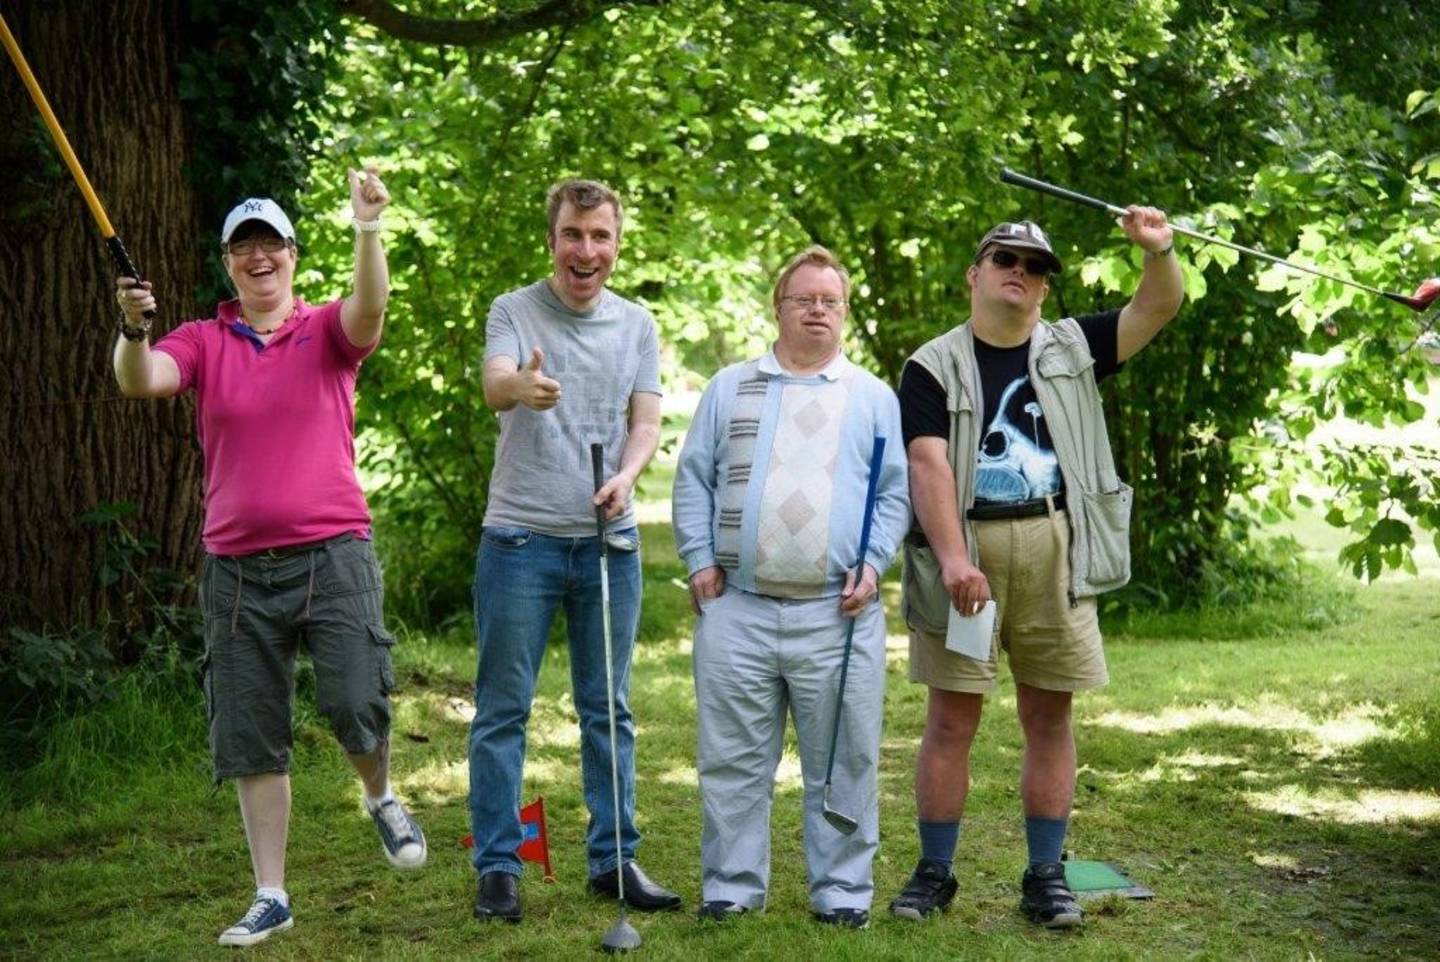 Disabled adults having fun playing golf